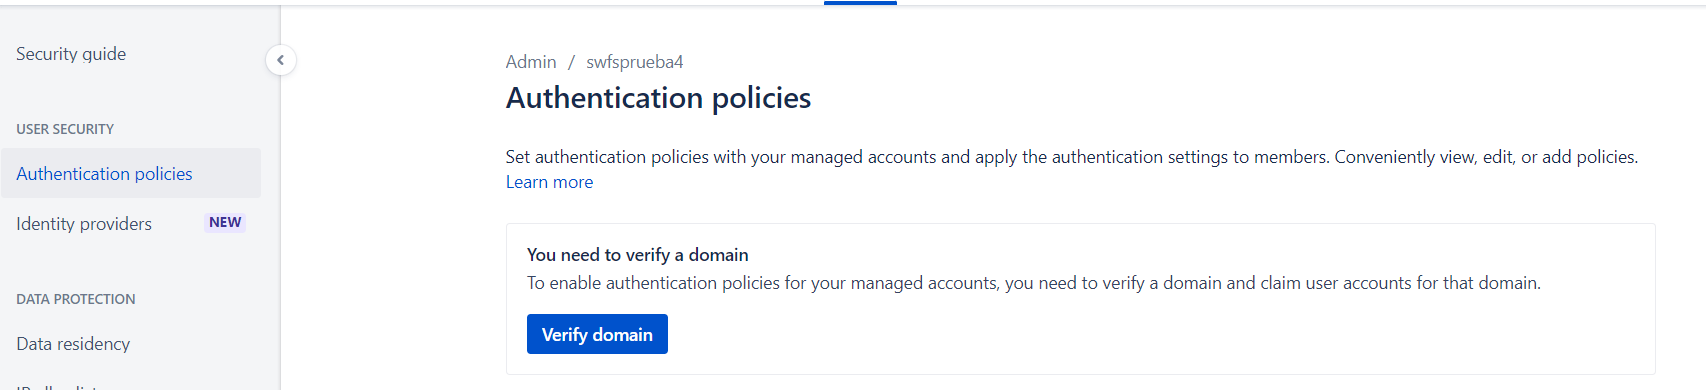 Authentication policies